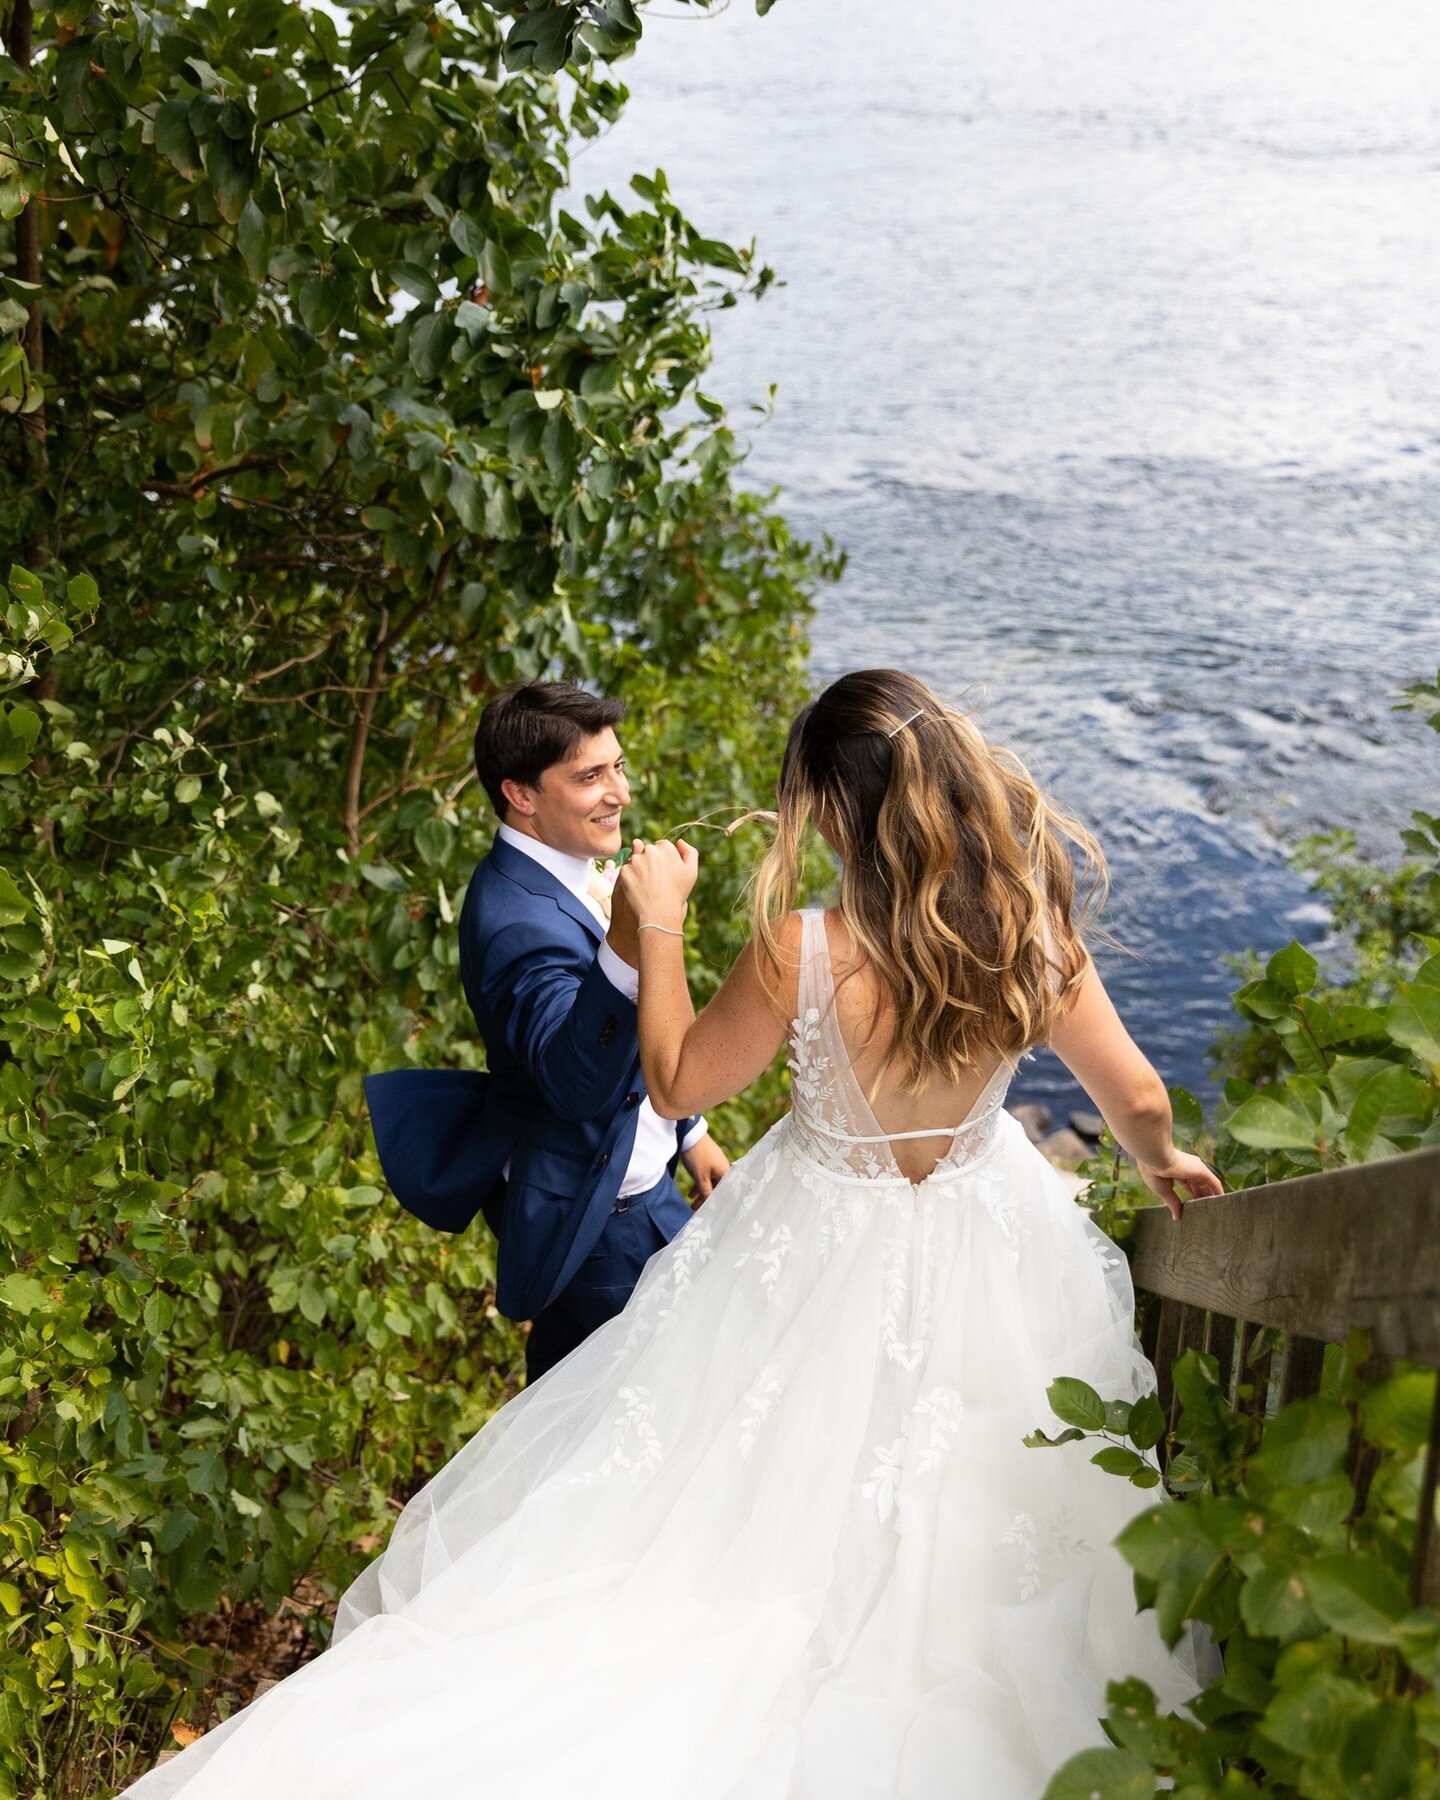 This past Sunday I had the absolute pleasure of capturing Julianne and Anthony&rsquo;s elopement in the Delaware Watergap area of Pennsylvania, and despite the 95 degree weather and 90% humidity they went along with my walking up and down stairs crea